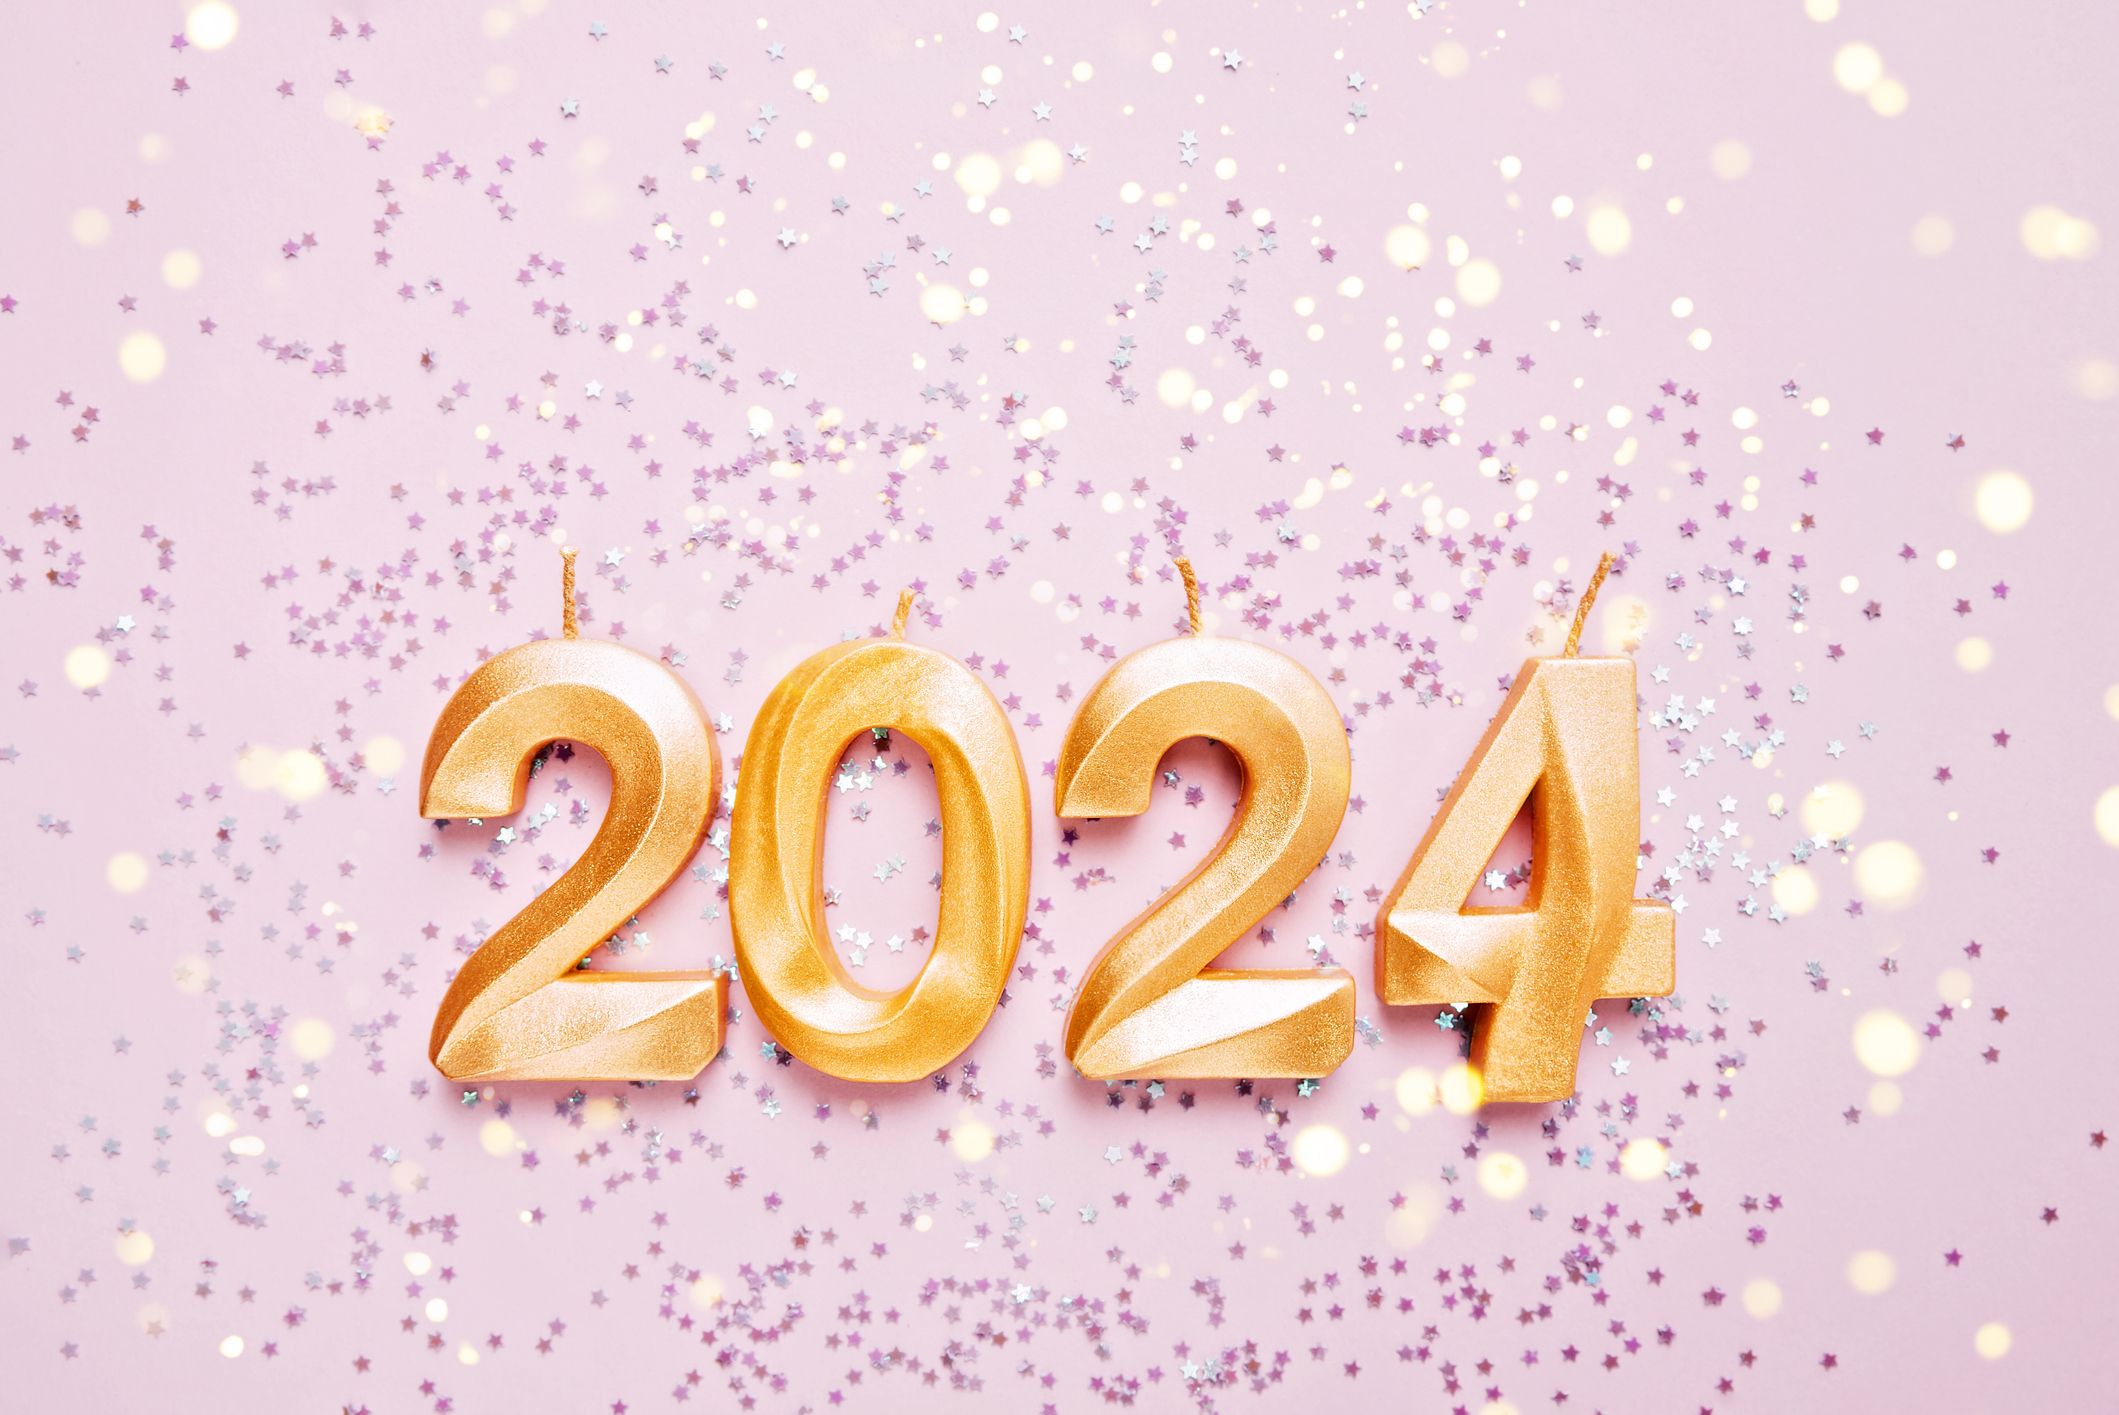 35 Best New Year's Eve Games to Play With Friends and Family 2023